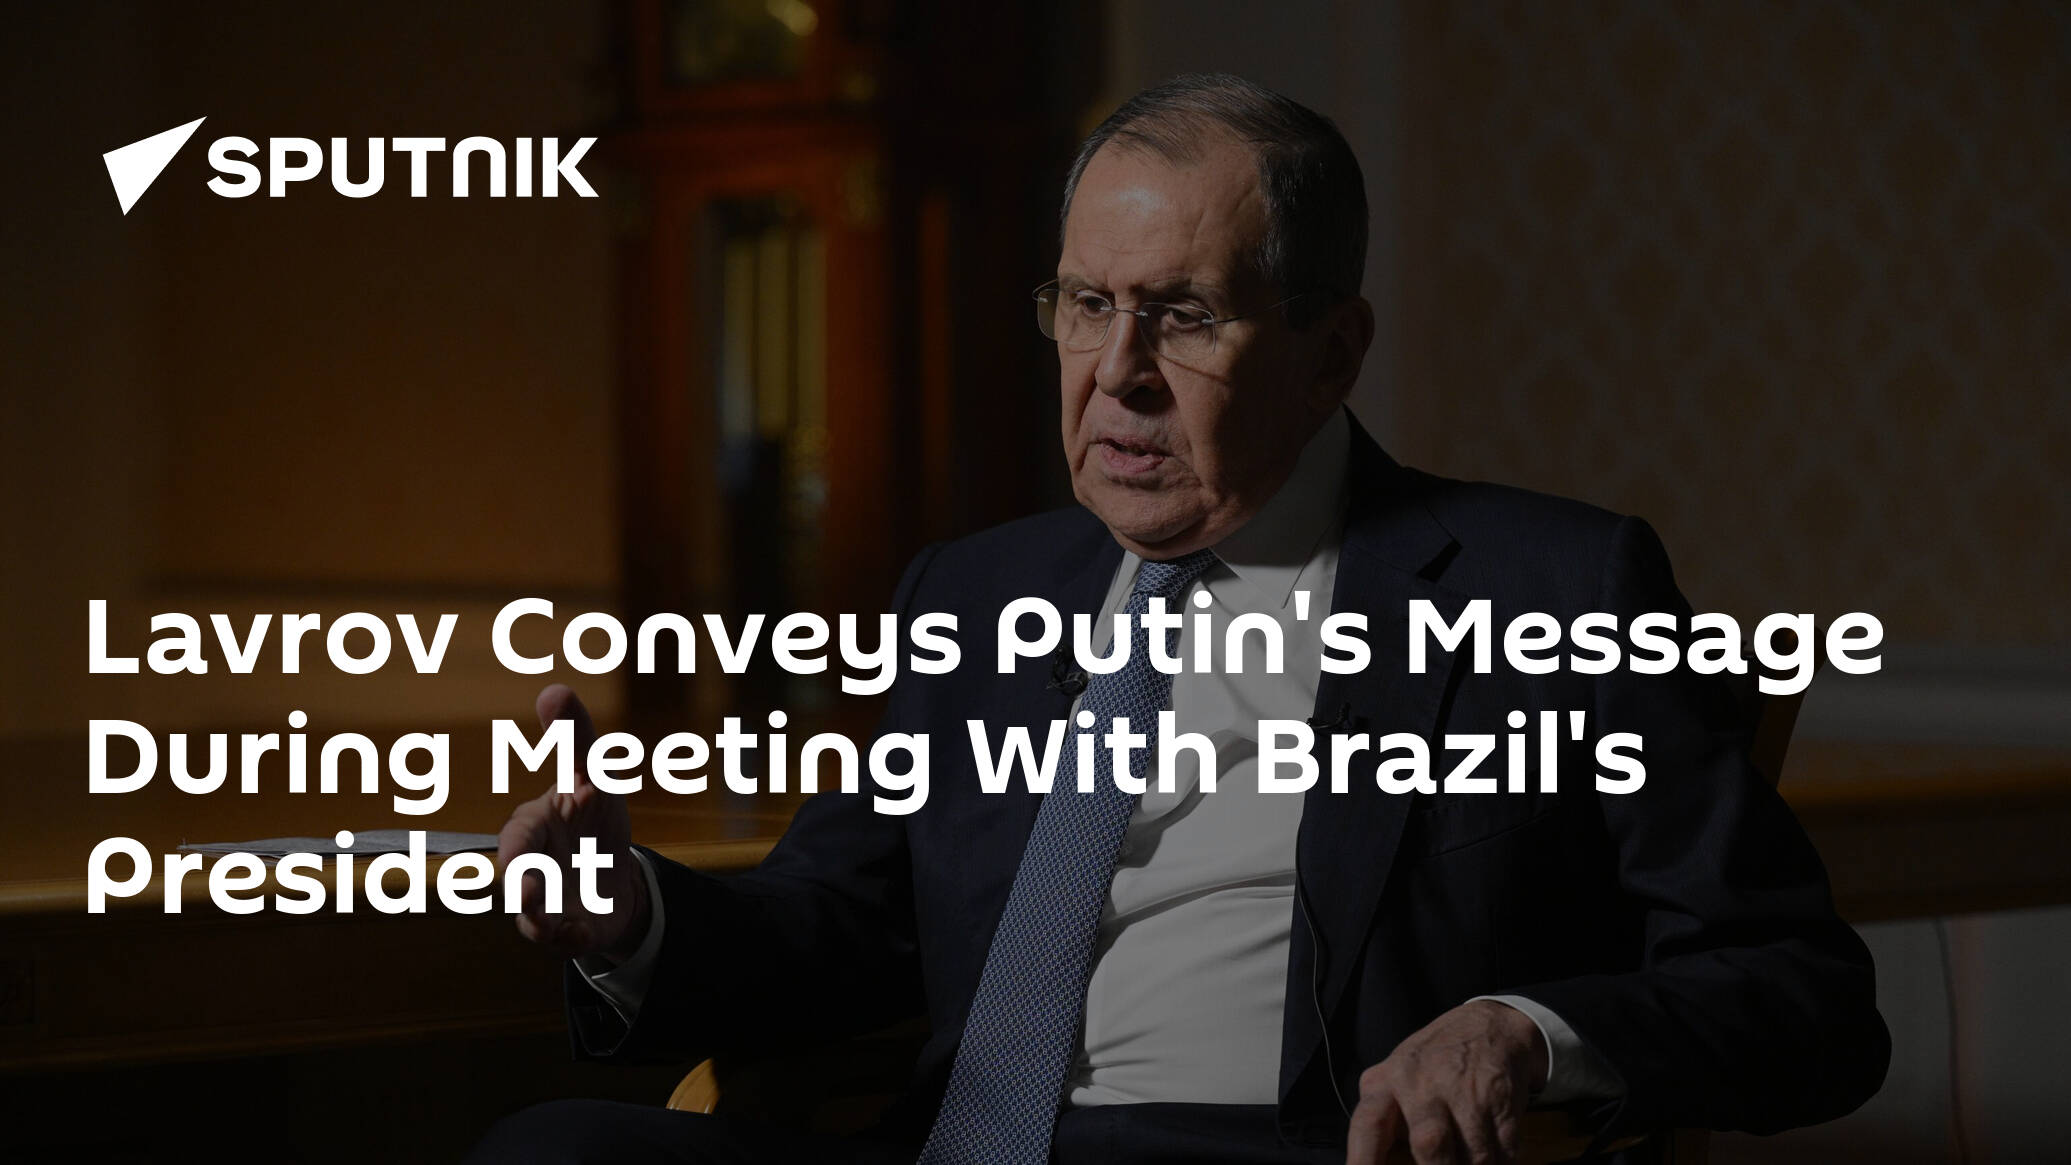 Lavrov Conveys Putin's Message During Meeting With Brazil's President